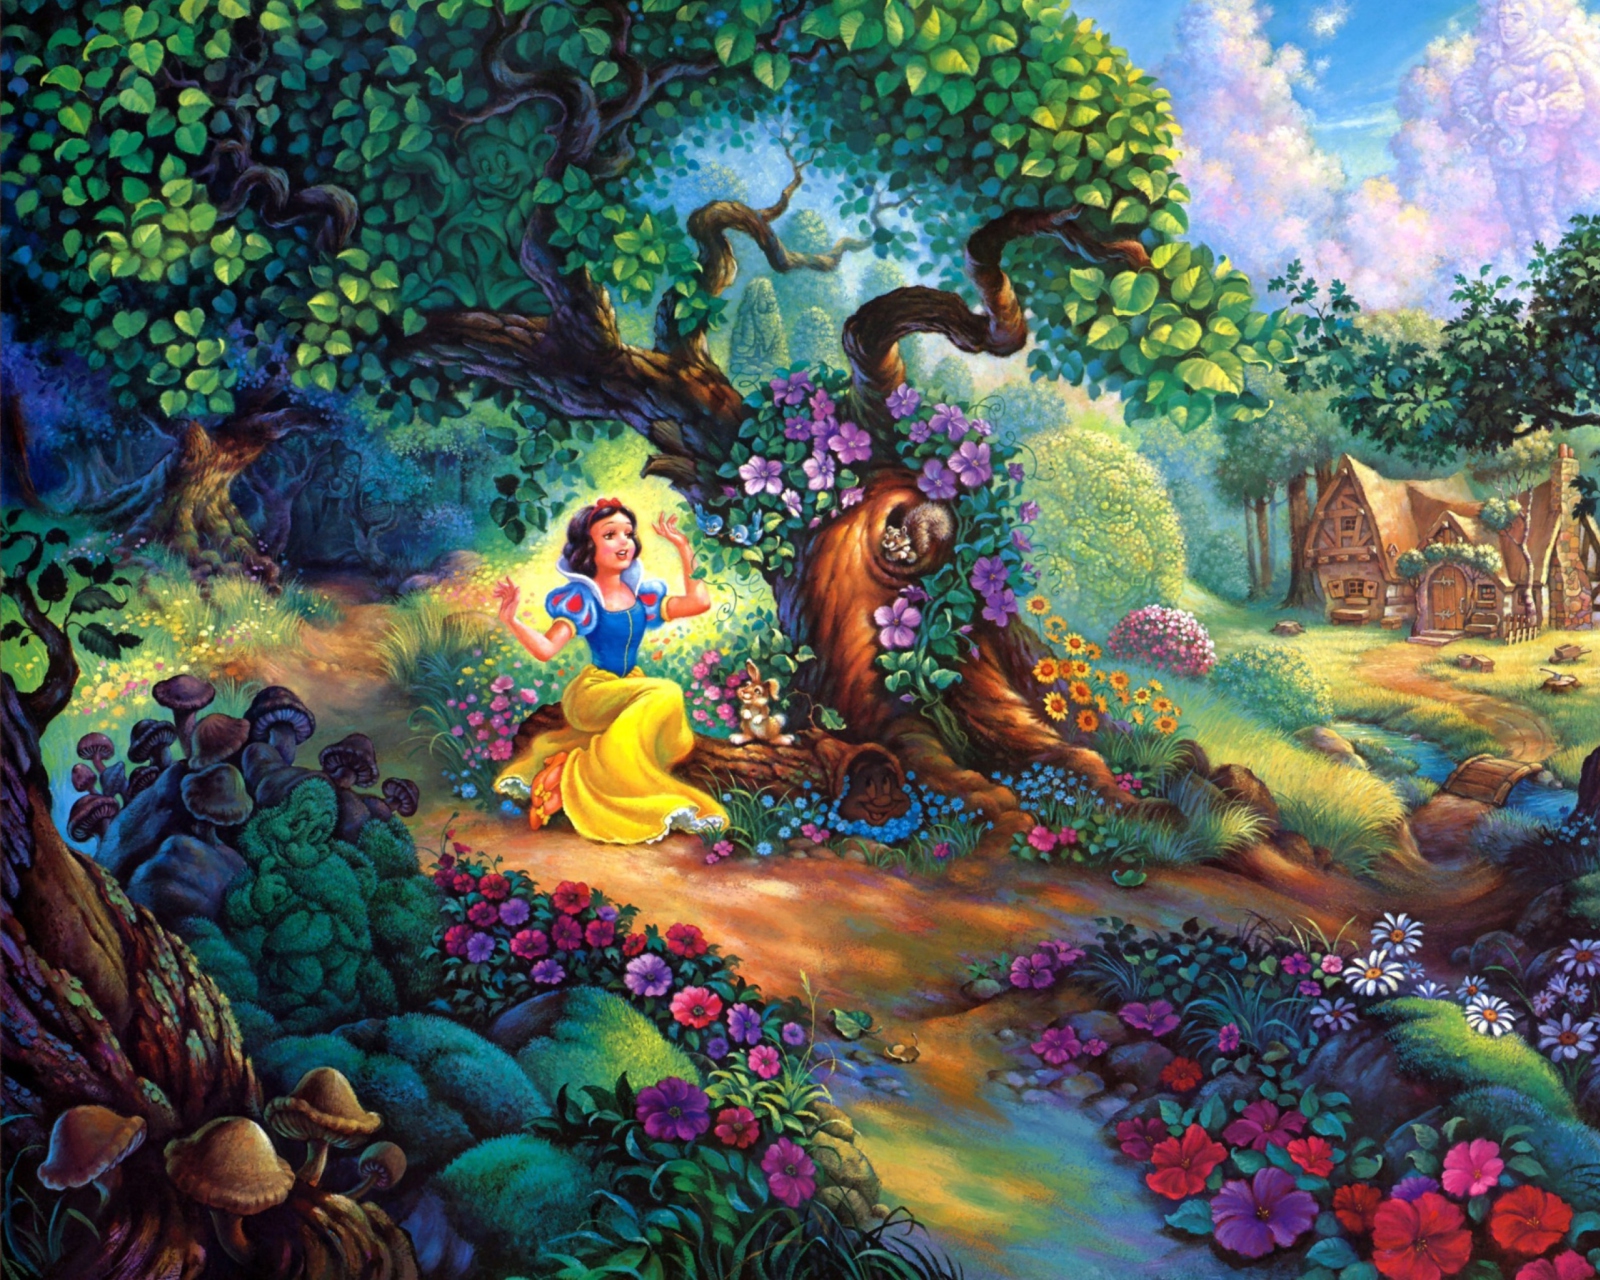 Snow White In Magical Forest wallpaper 1600x1280